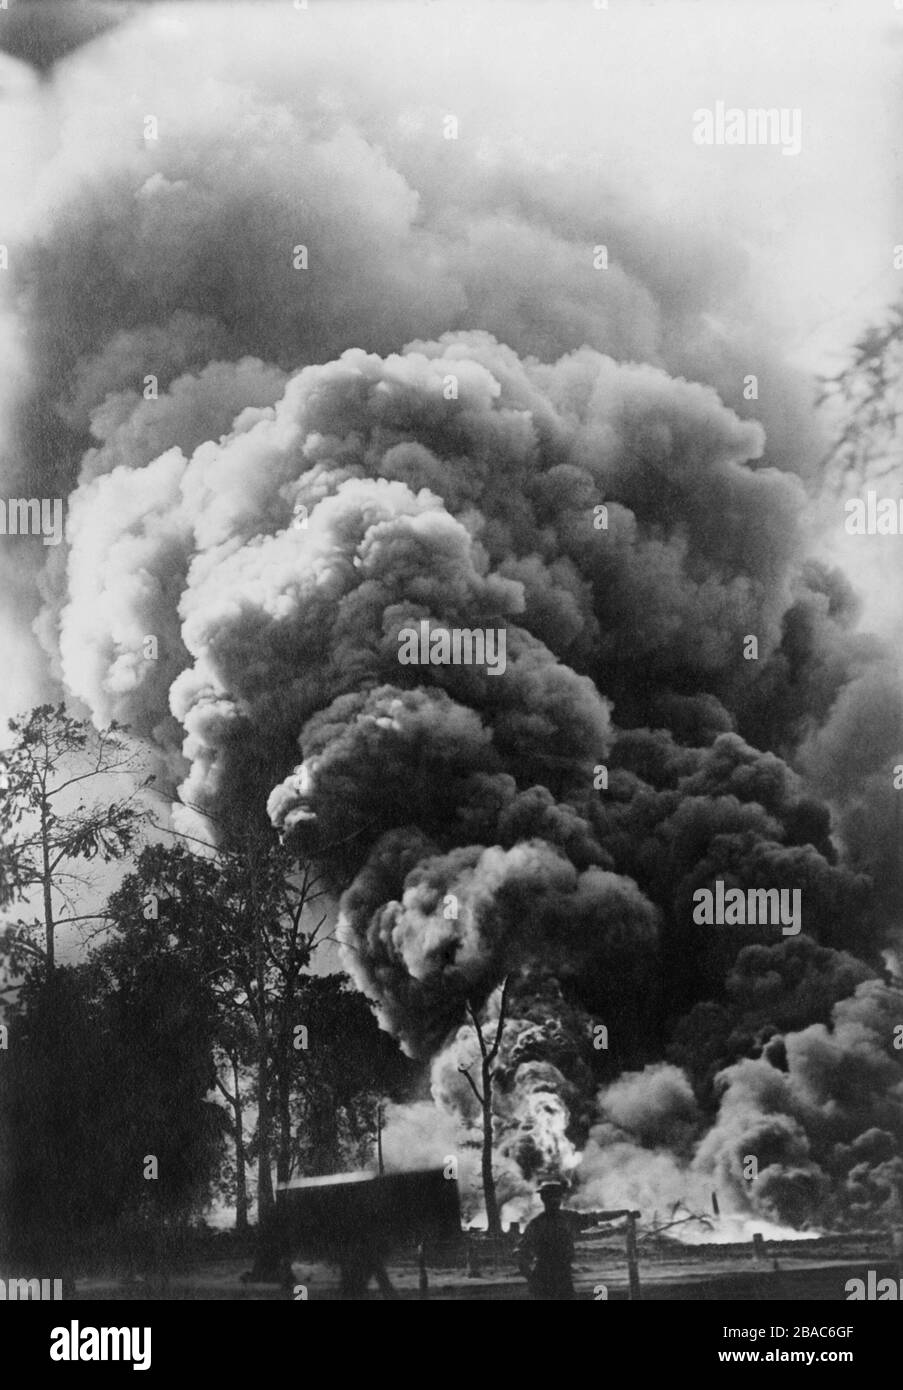 Huge oil gusher fire billows a monstrous column of roaring flame and smoke, August 1913. It started on Aug. 7, at the Star Oil Co. Loucke no. 3, in Mooringsport, Louisiana, and burned through 20,000 barrels per day  (BSLOC 2018 2 86) Stock Photo